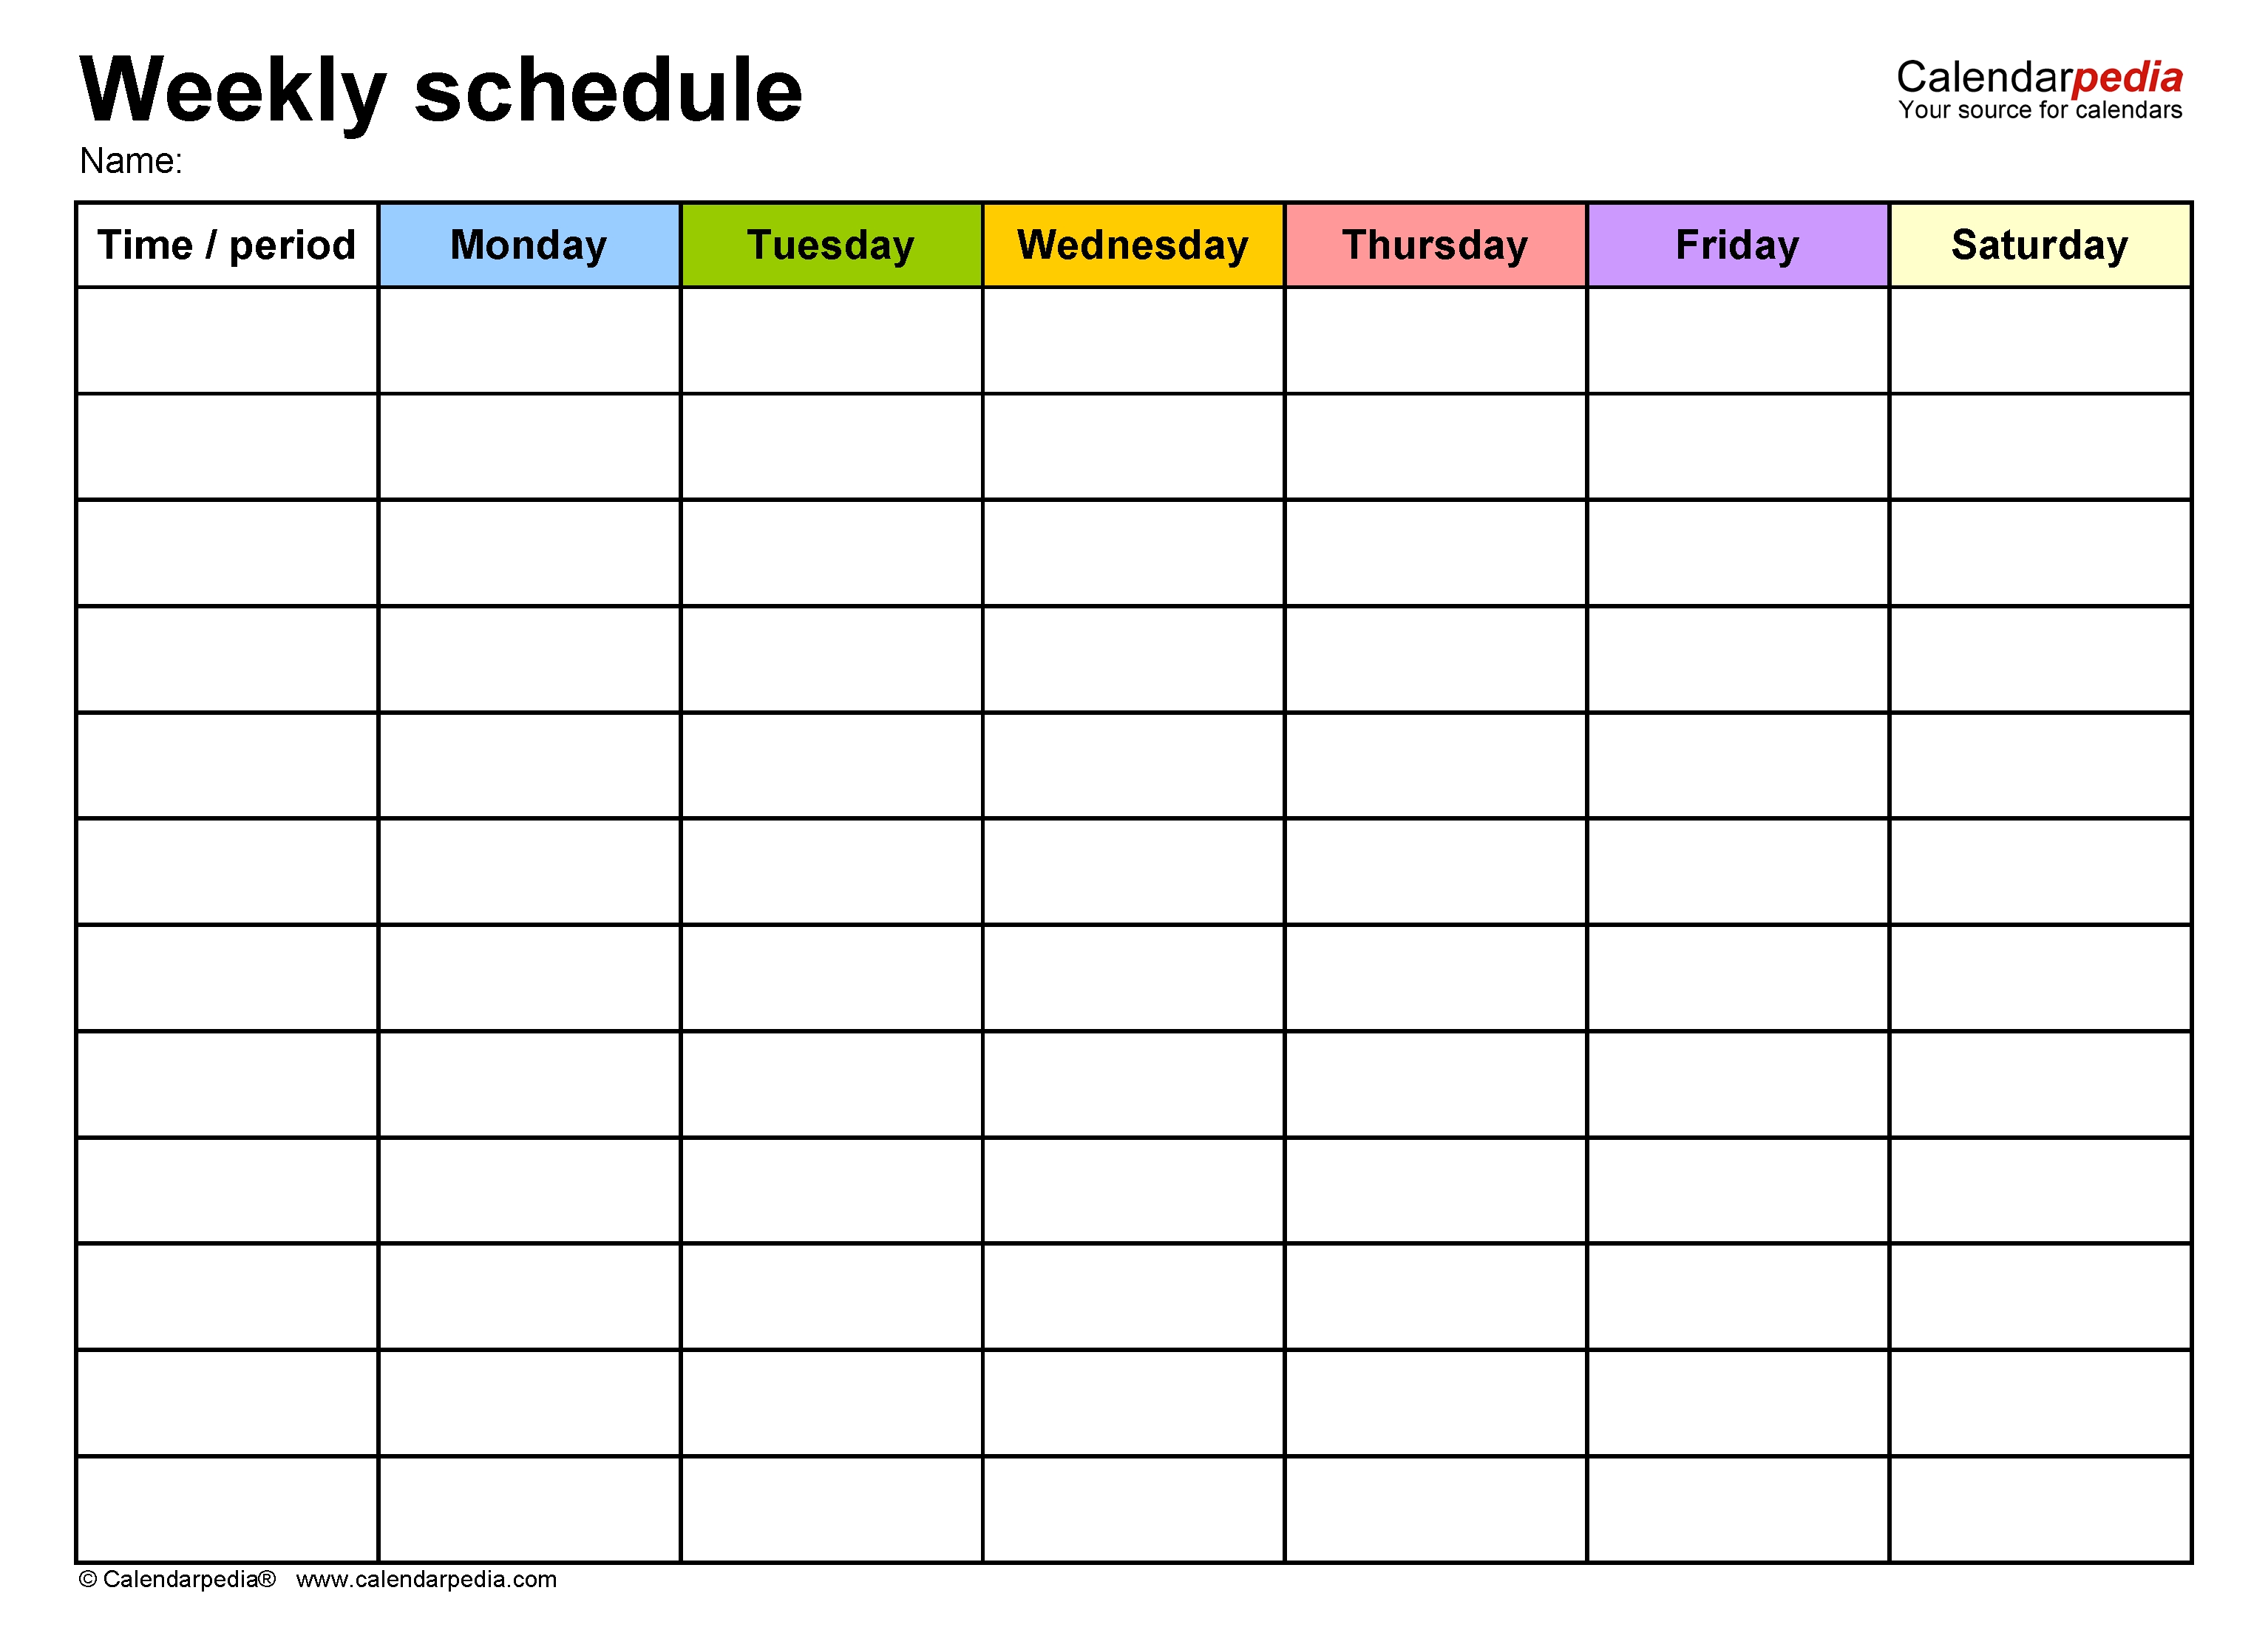 Free Weekly Schedule Templates For Word - 18 Templates  Weekly Calendar Template Editable